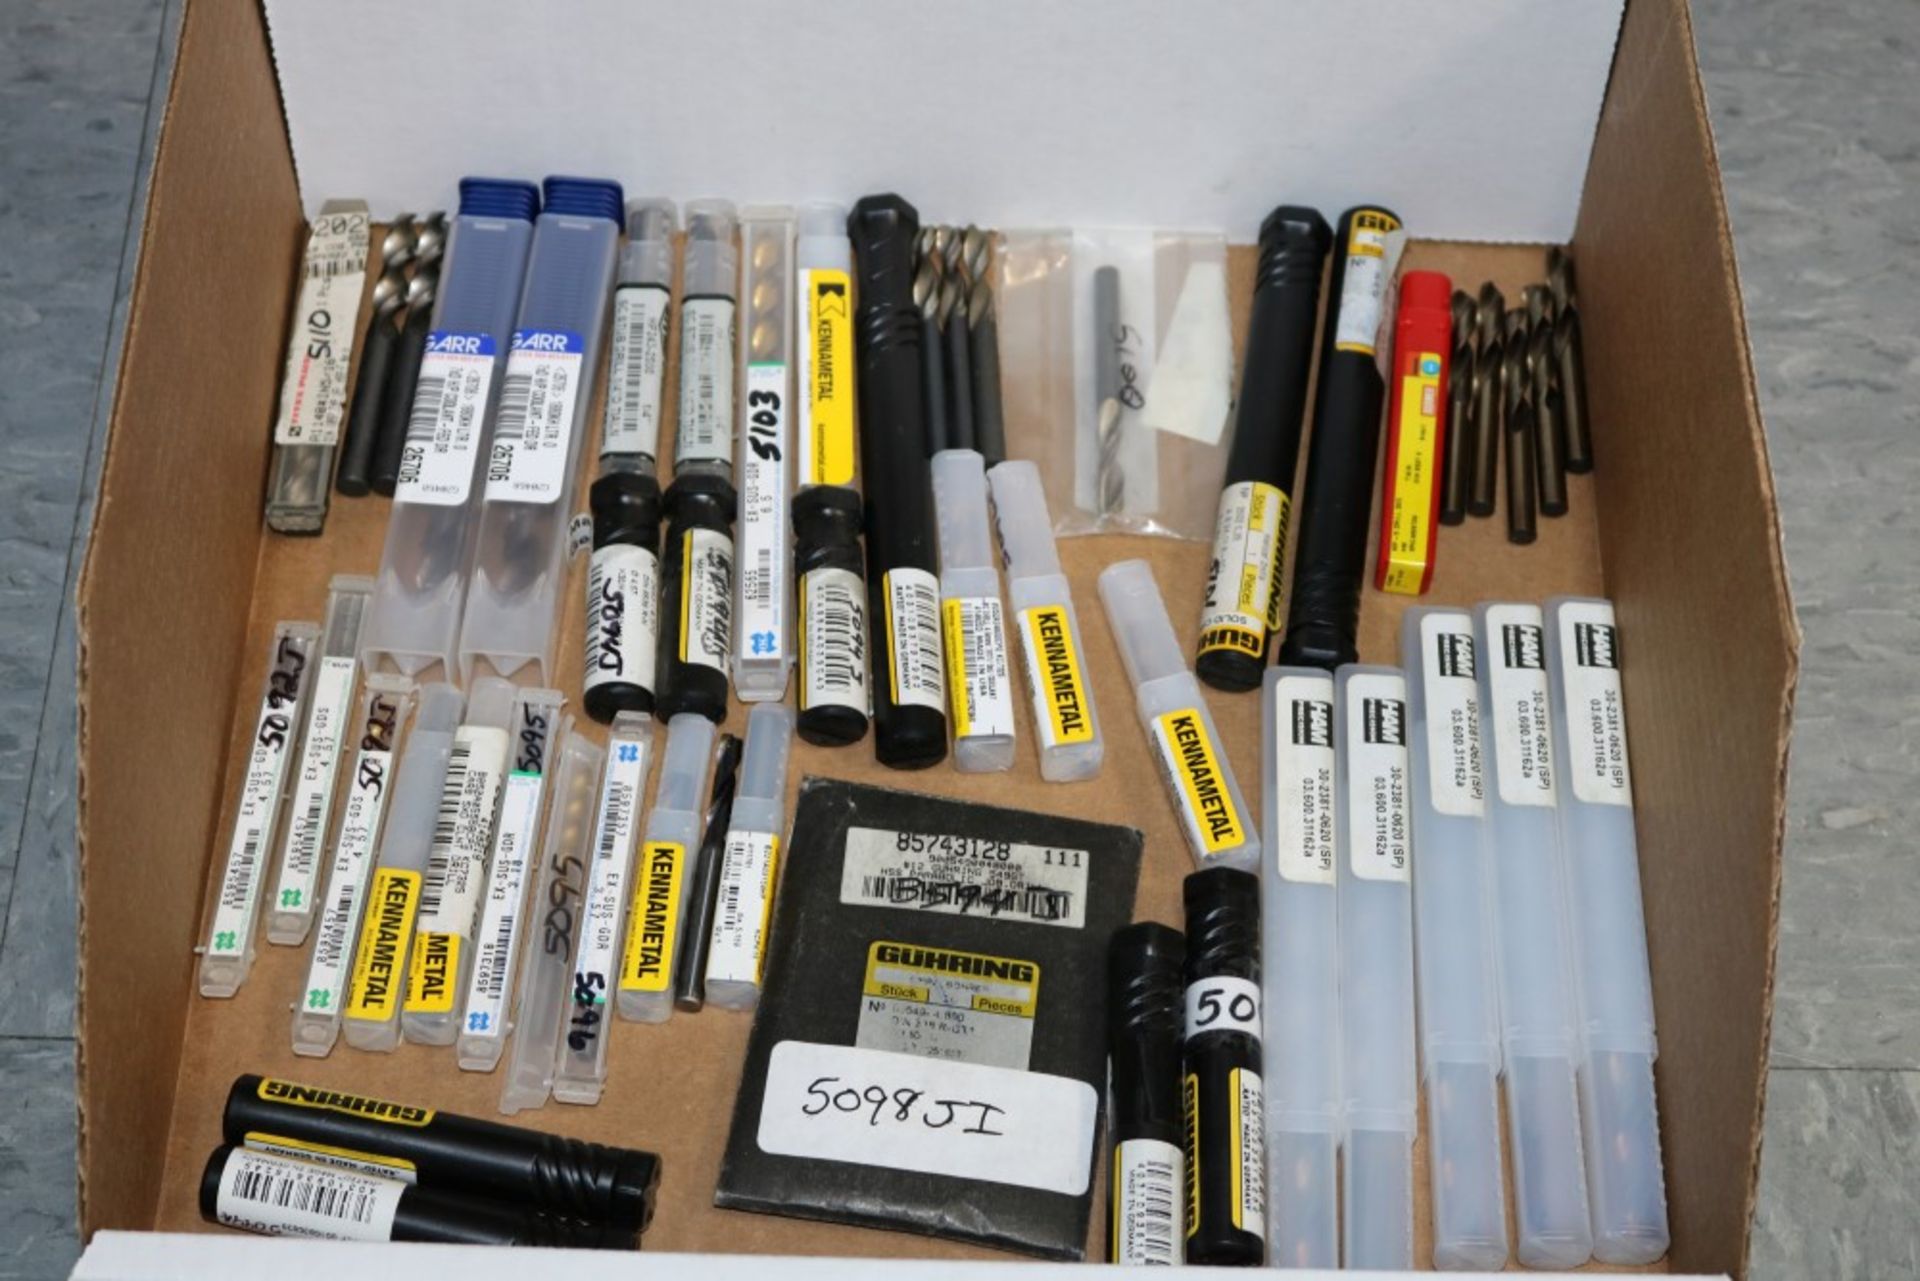 NEW Assorted Perishable Tooling, Drills, Through Coolant Drills (See Photos for Specific Tooling